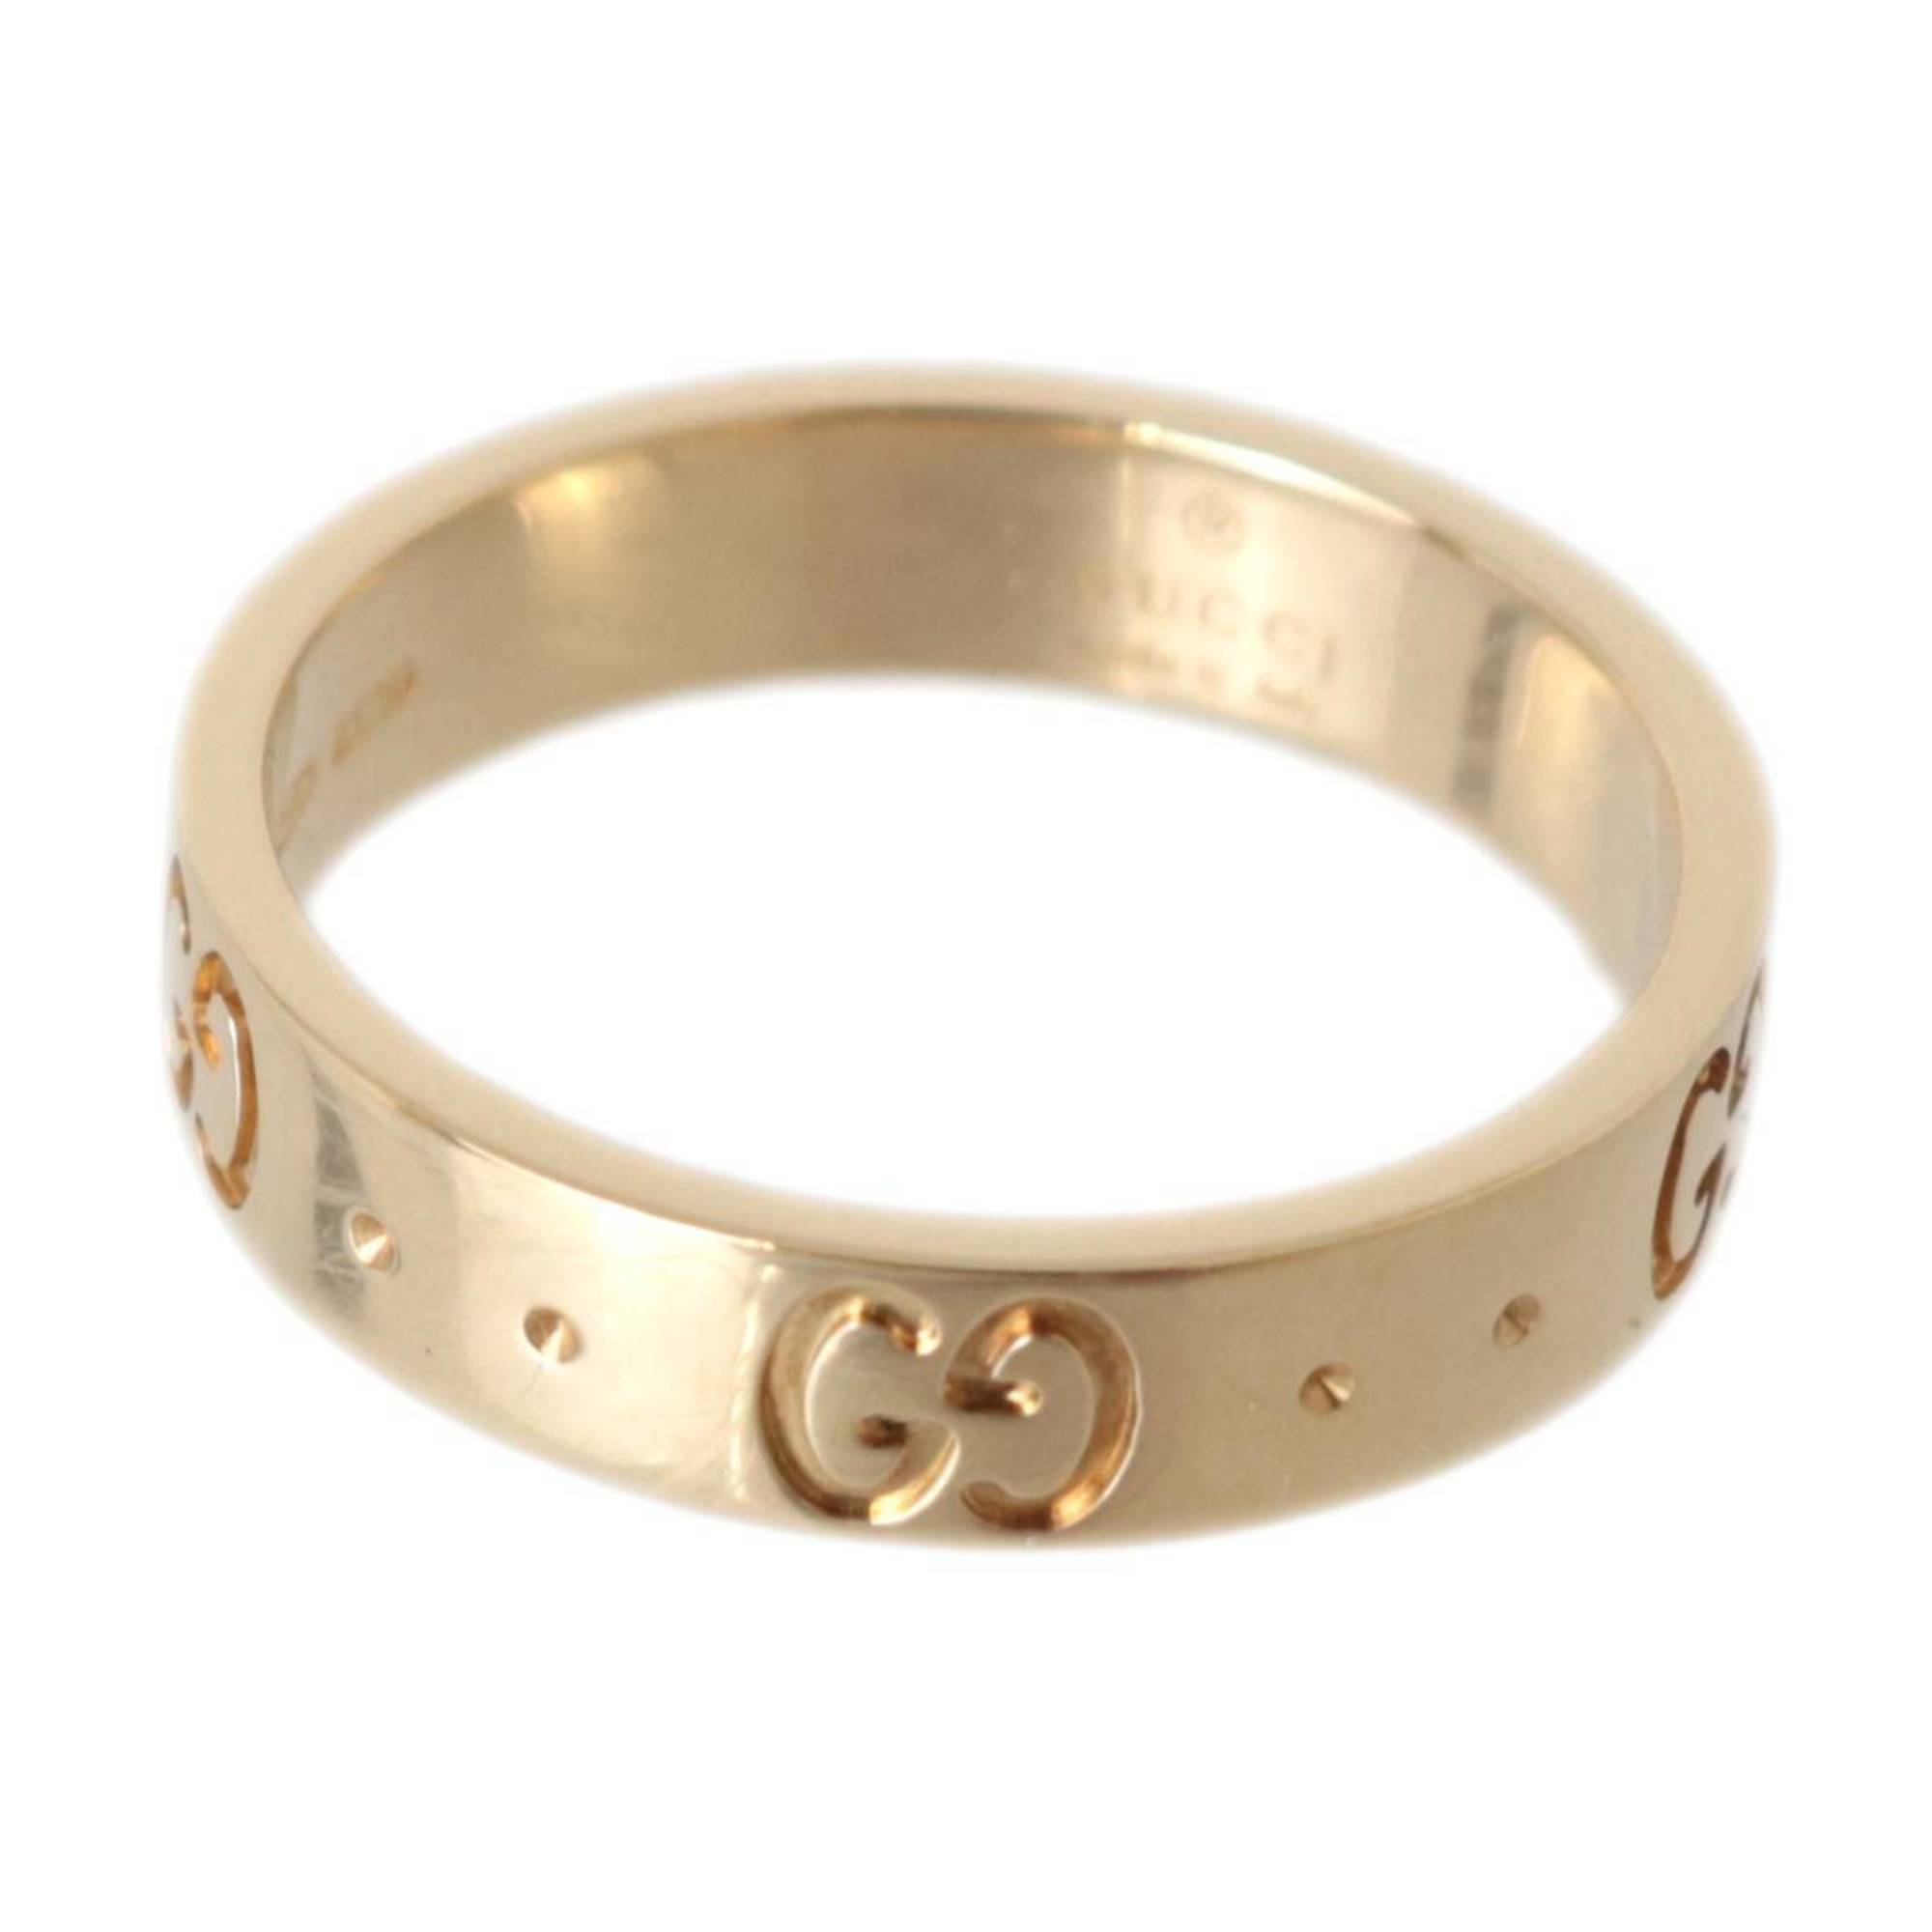 GUCCI / Gucci ICON icon K18 yellow gold ring size engraved 10